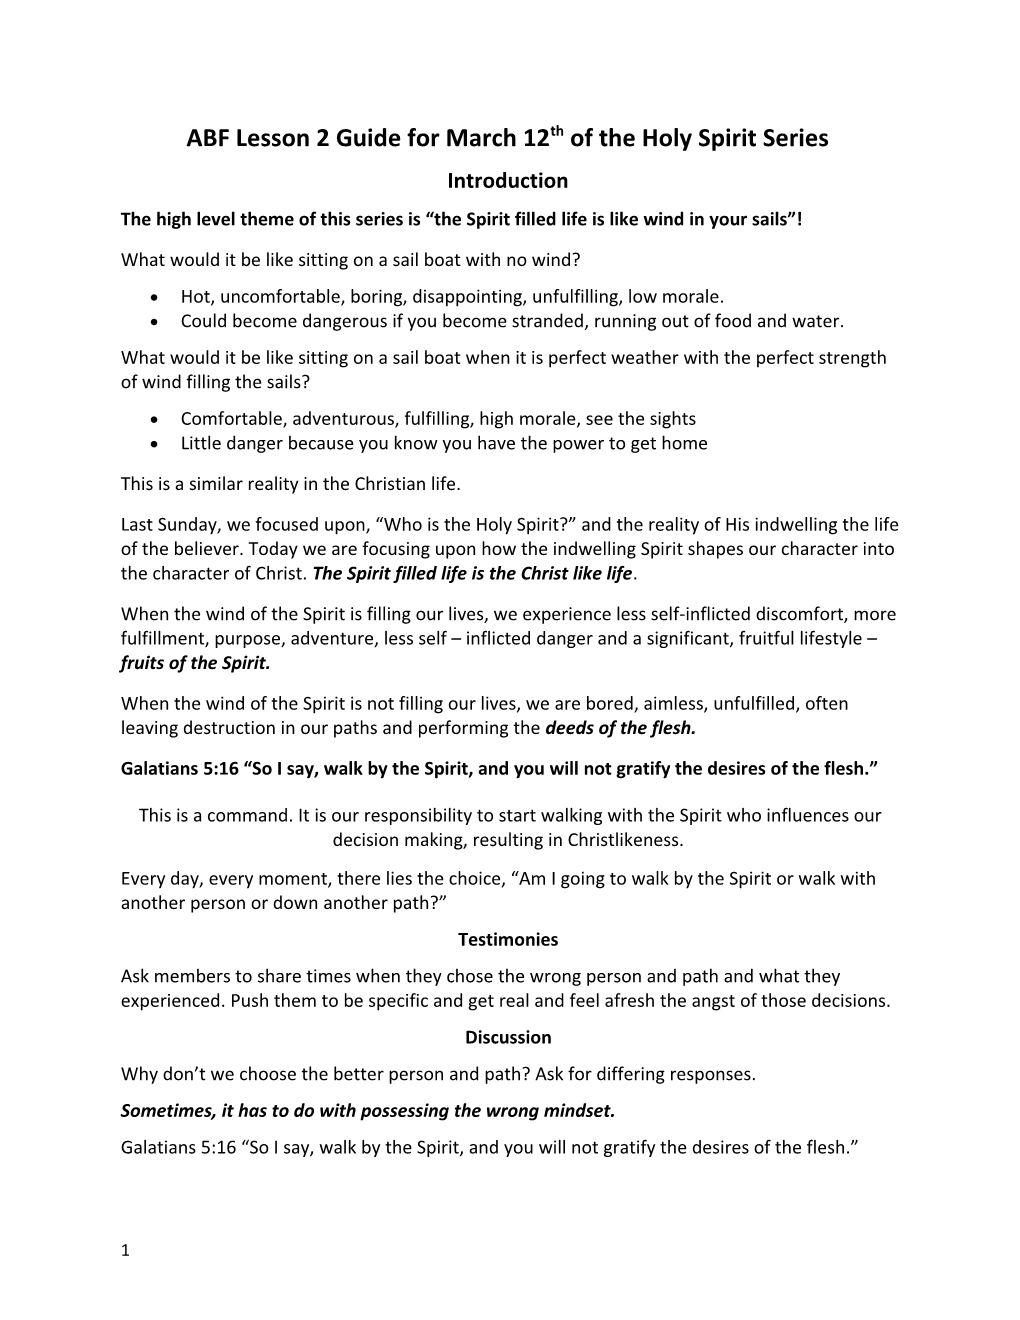 ABF Lesson 2 Guide for March 12Thof the Holy Spirit Series